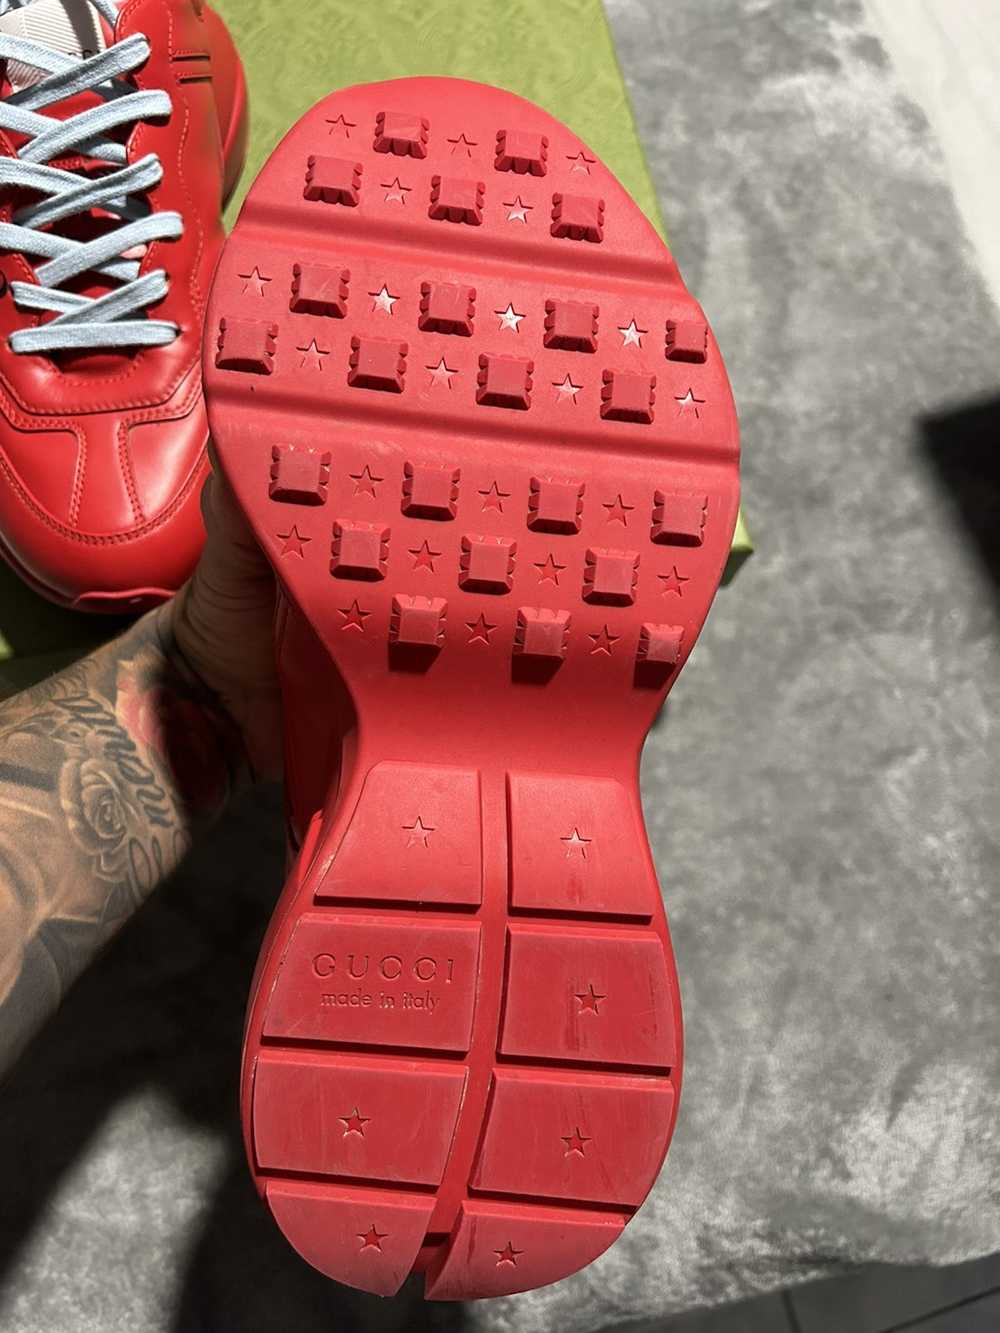 Gucci Gucci 100 Rython sneakers - image 8